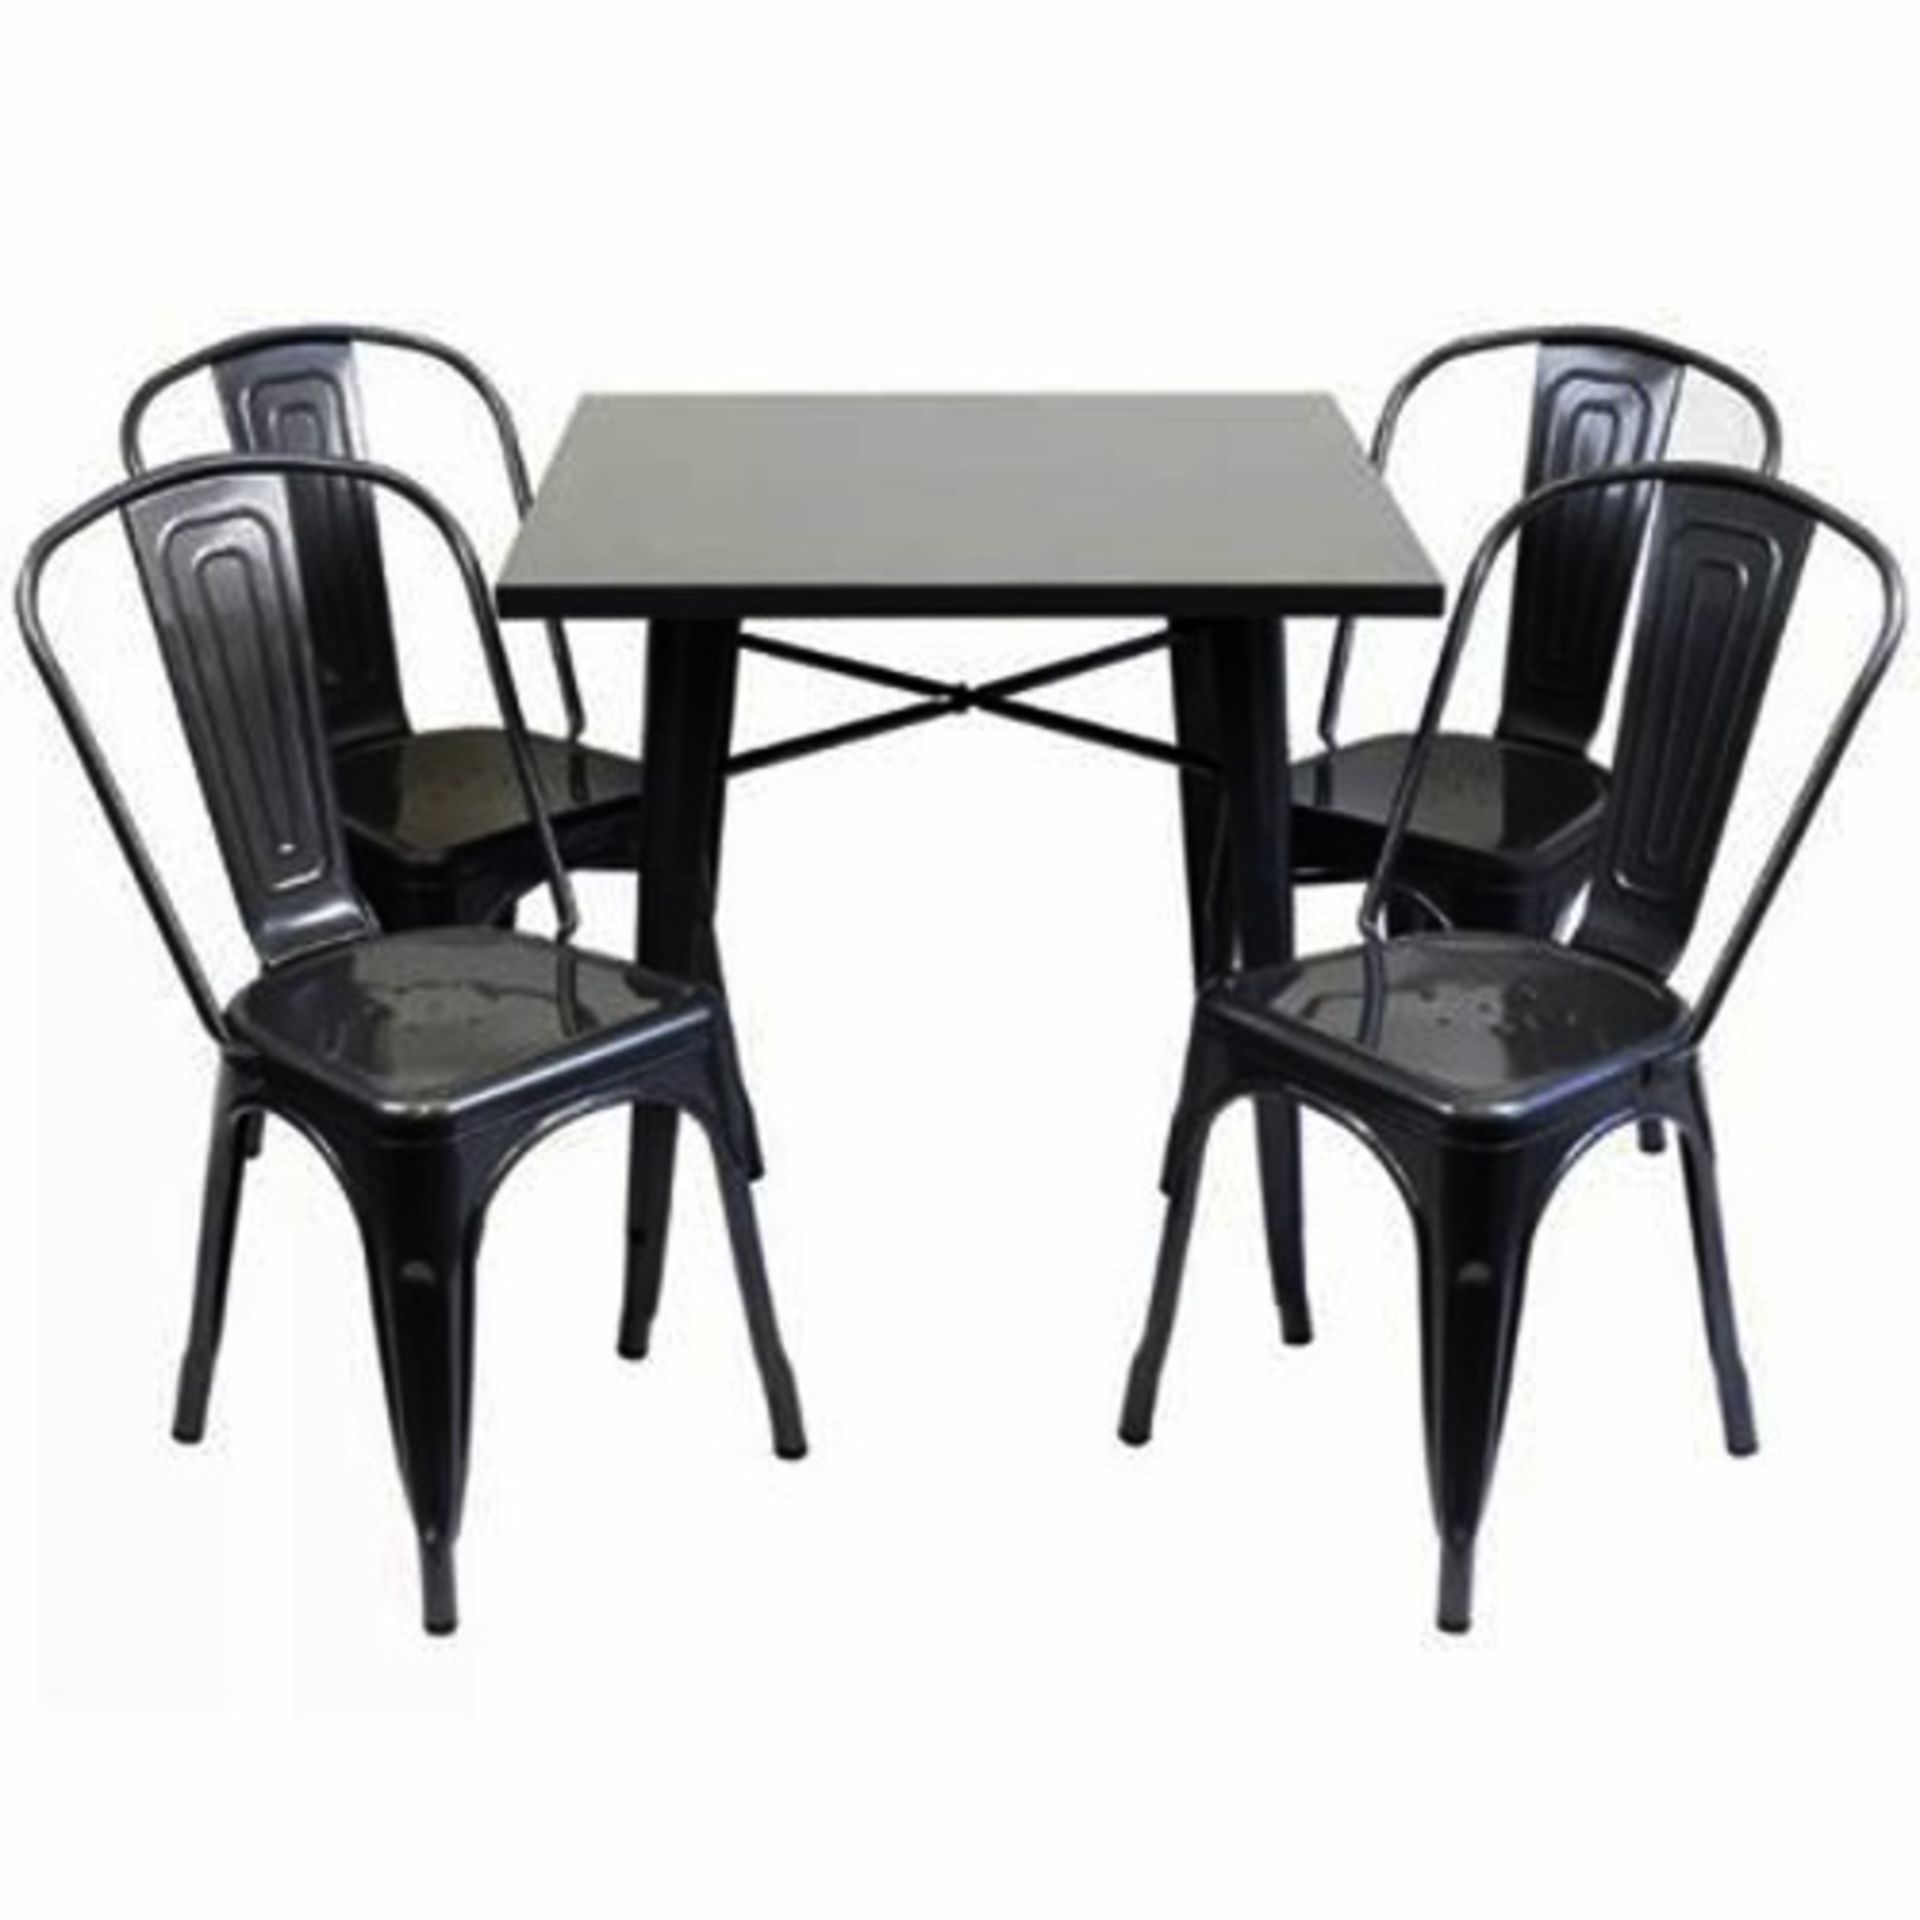 1 x Tolix Industrial Style Outdoor Bistro Table and Chair Set in Black - Includes 1 x Table and 4 - Image 2 of 11